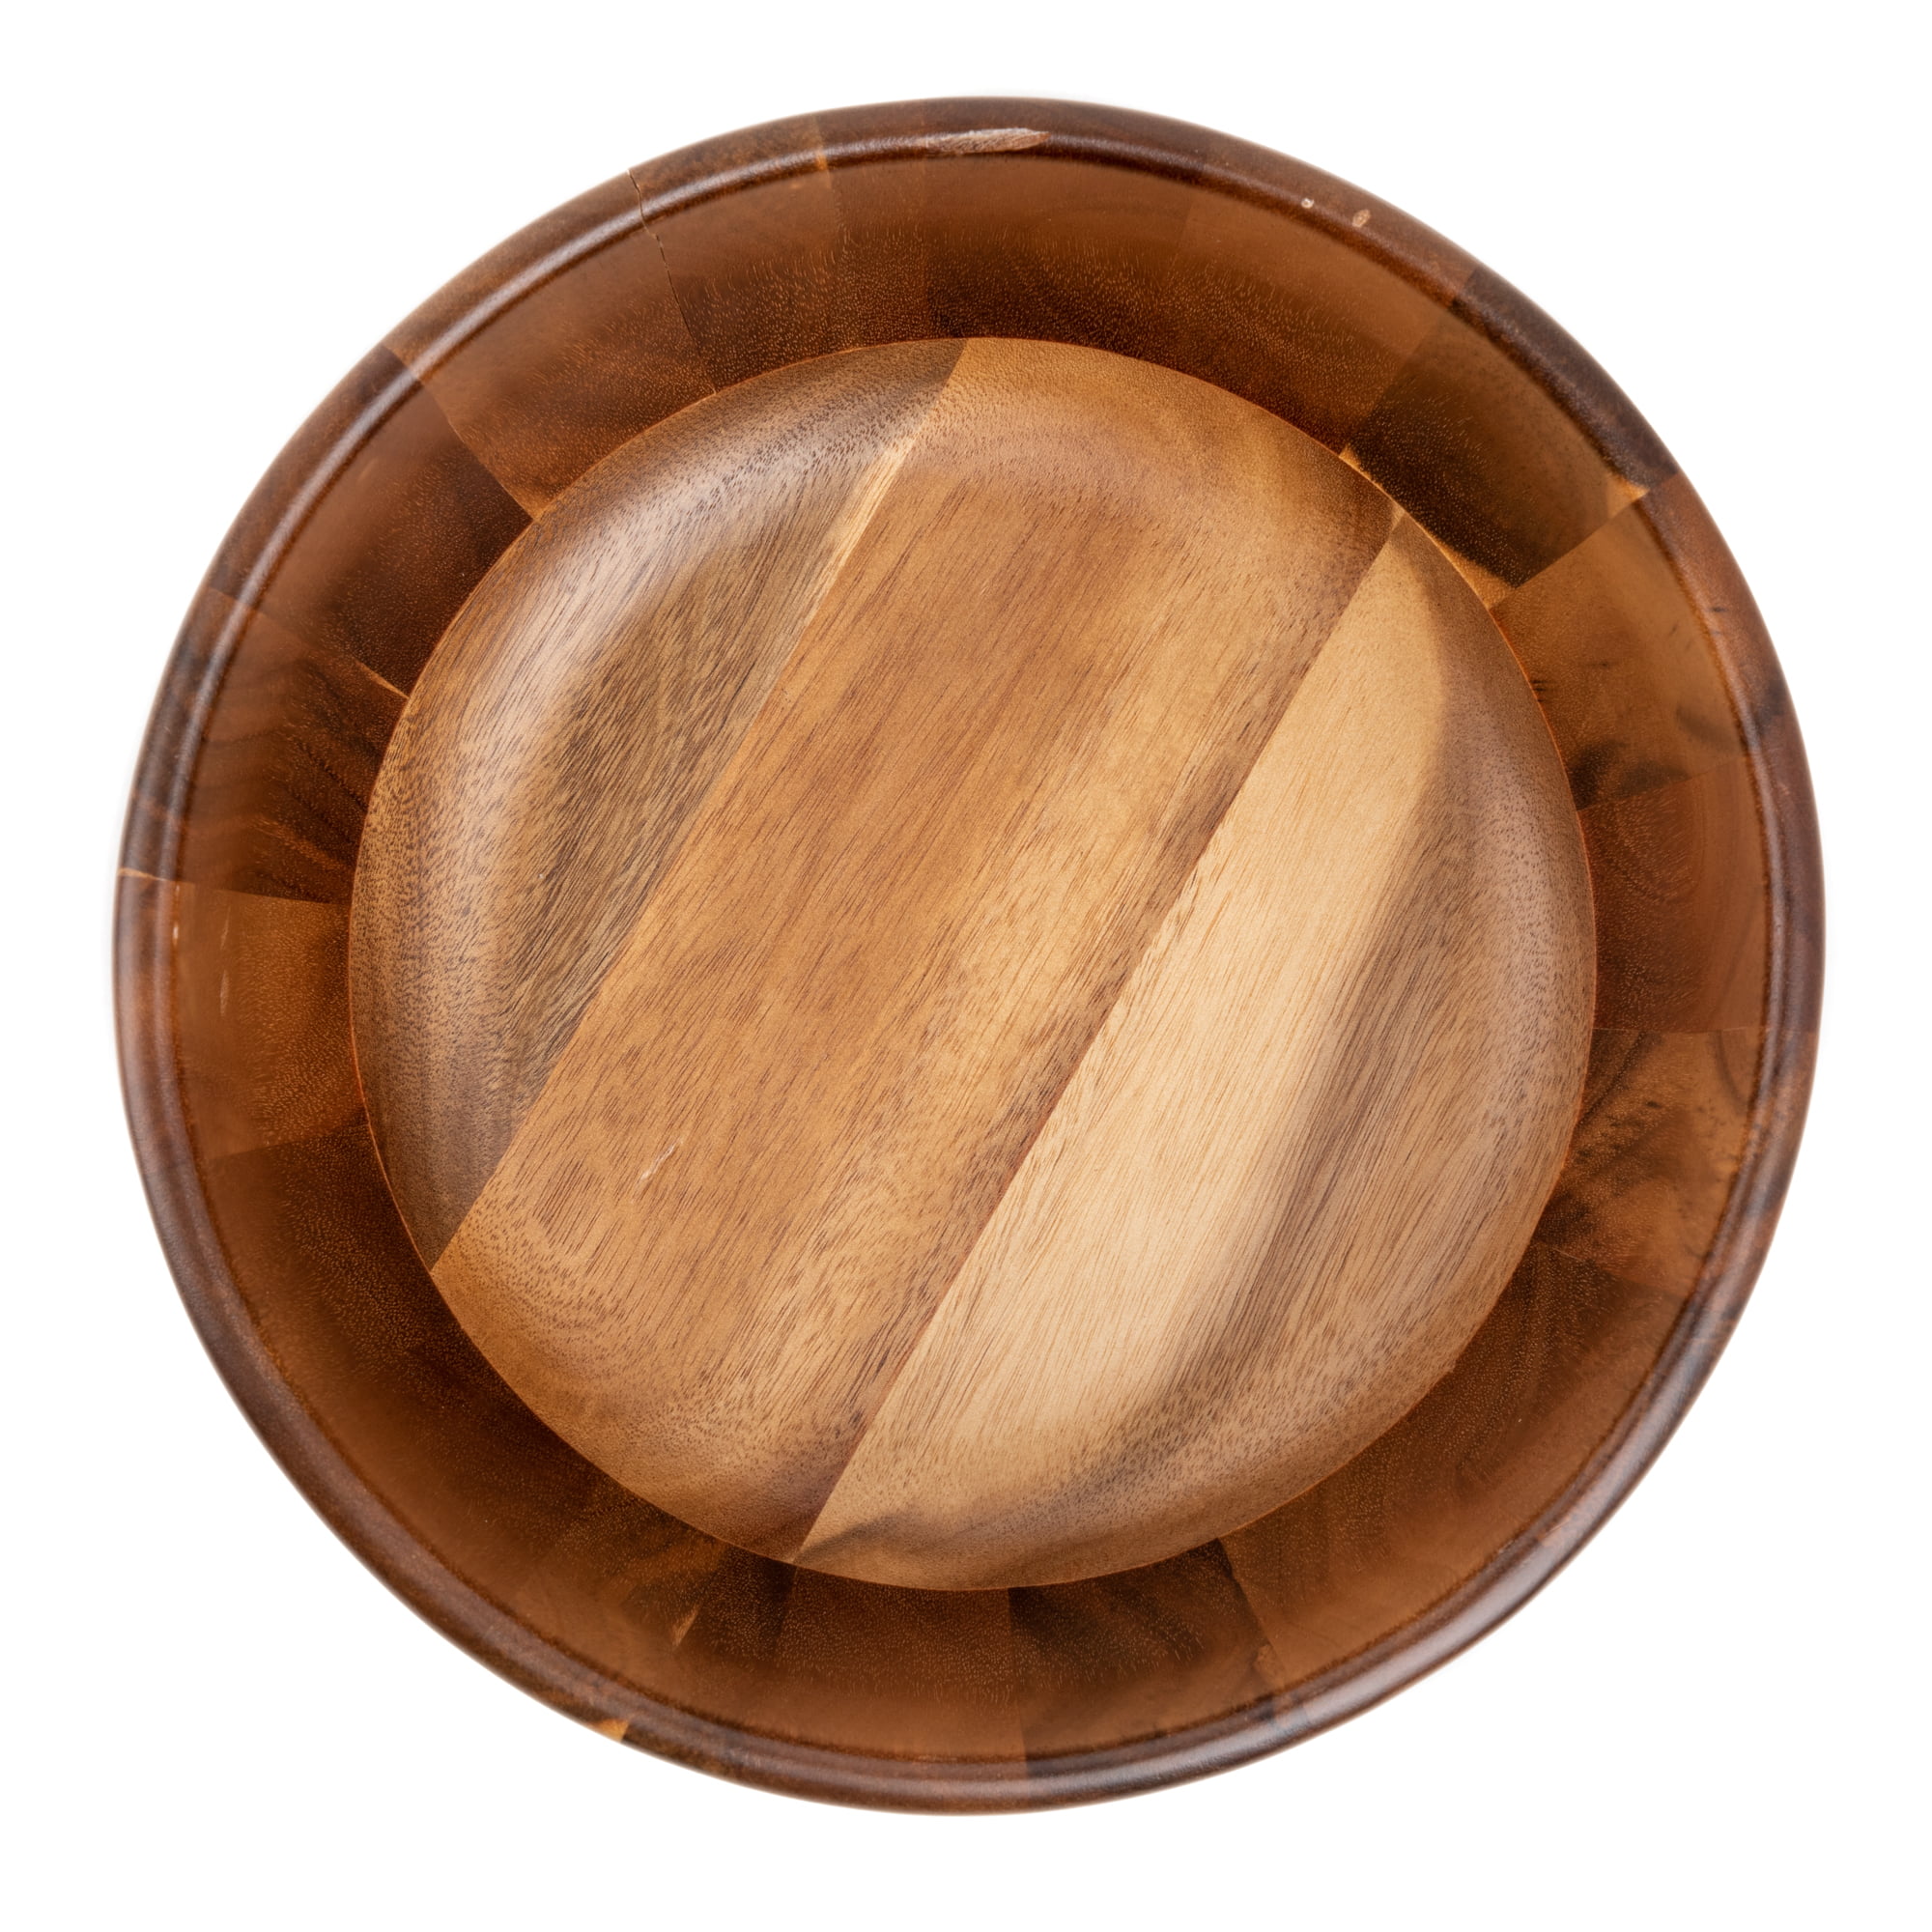 SDS Bowl Acacia Wood Round Bowl Nuts and Snack Set of 4 